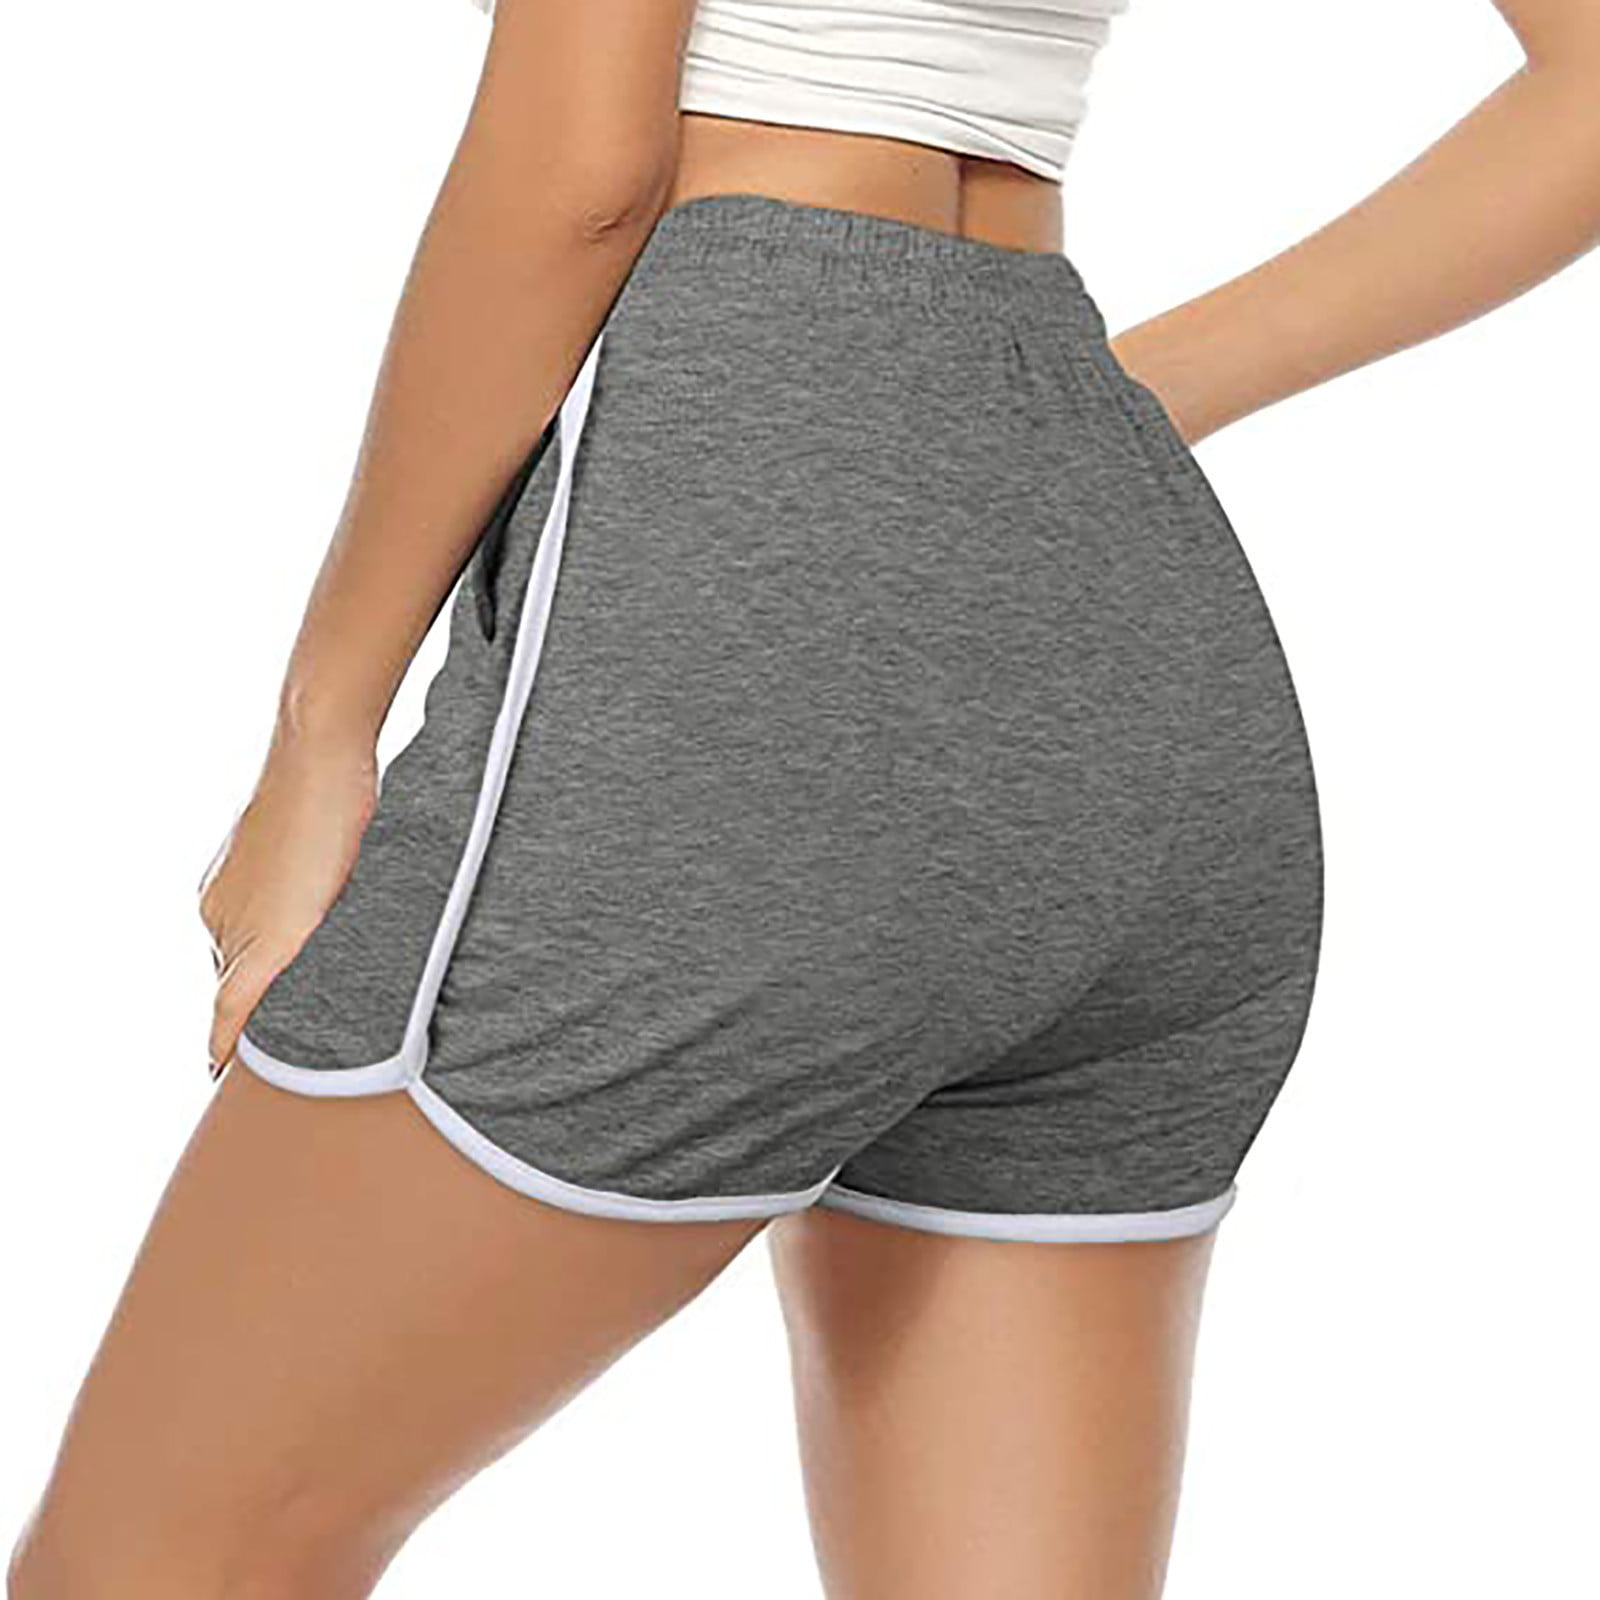 YYV Women's Running Shorts with Zipper Pockets Quick-Dry Elastic Waist Band  Athletic Gym Shorts for Women with Liner Grey Sage Medium